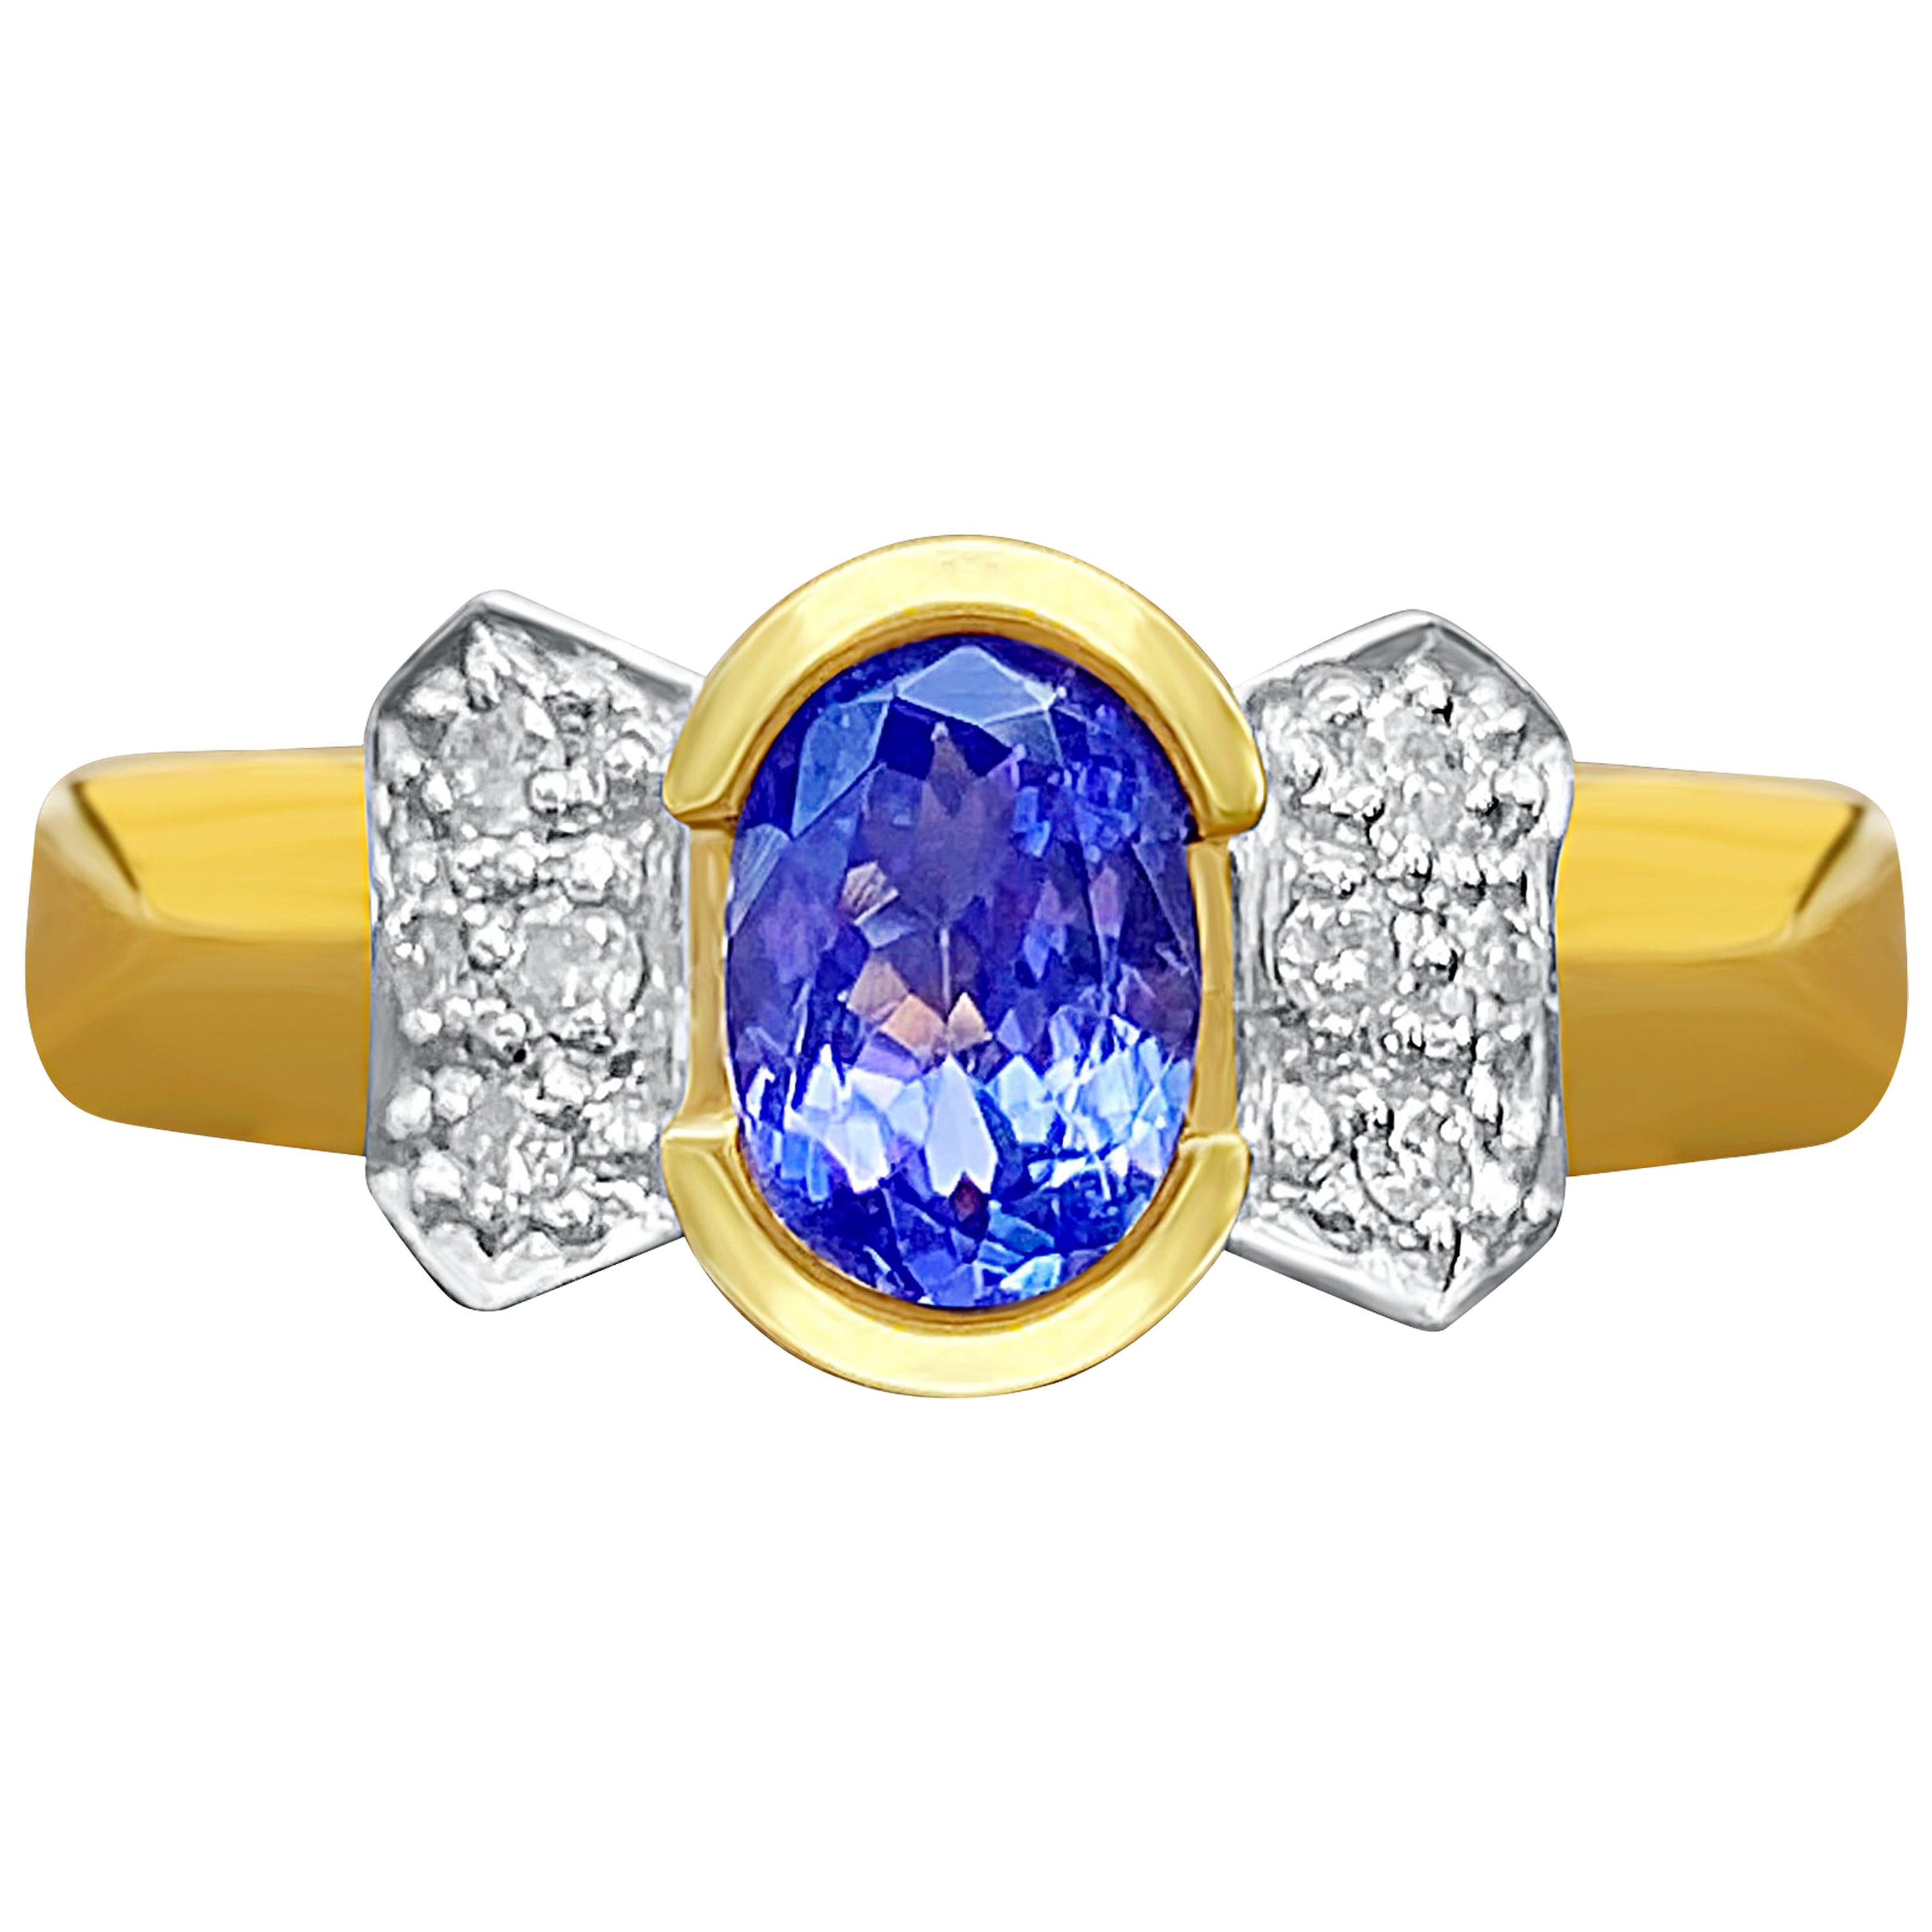 0.78 Carat Oval-Cut Tanzanite, Diamond and 14K Yellow Gold Engagement Ring For Sale